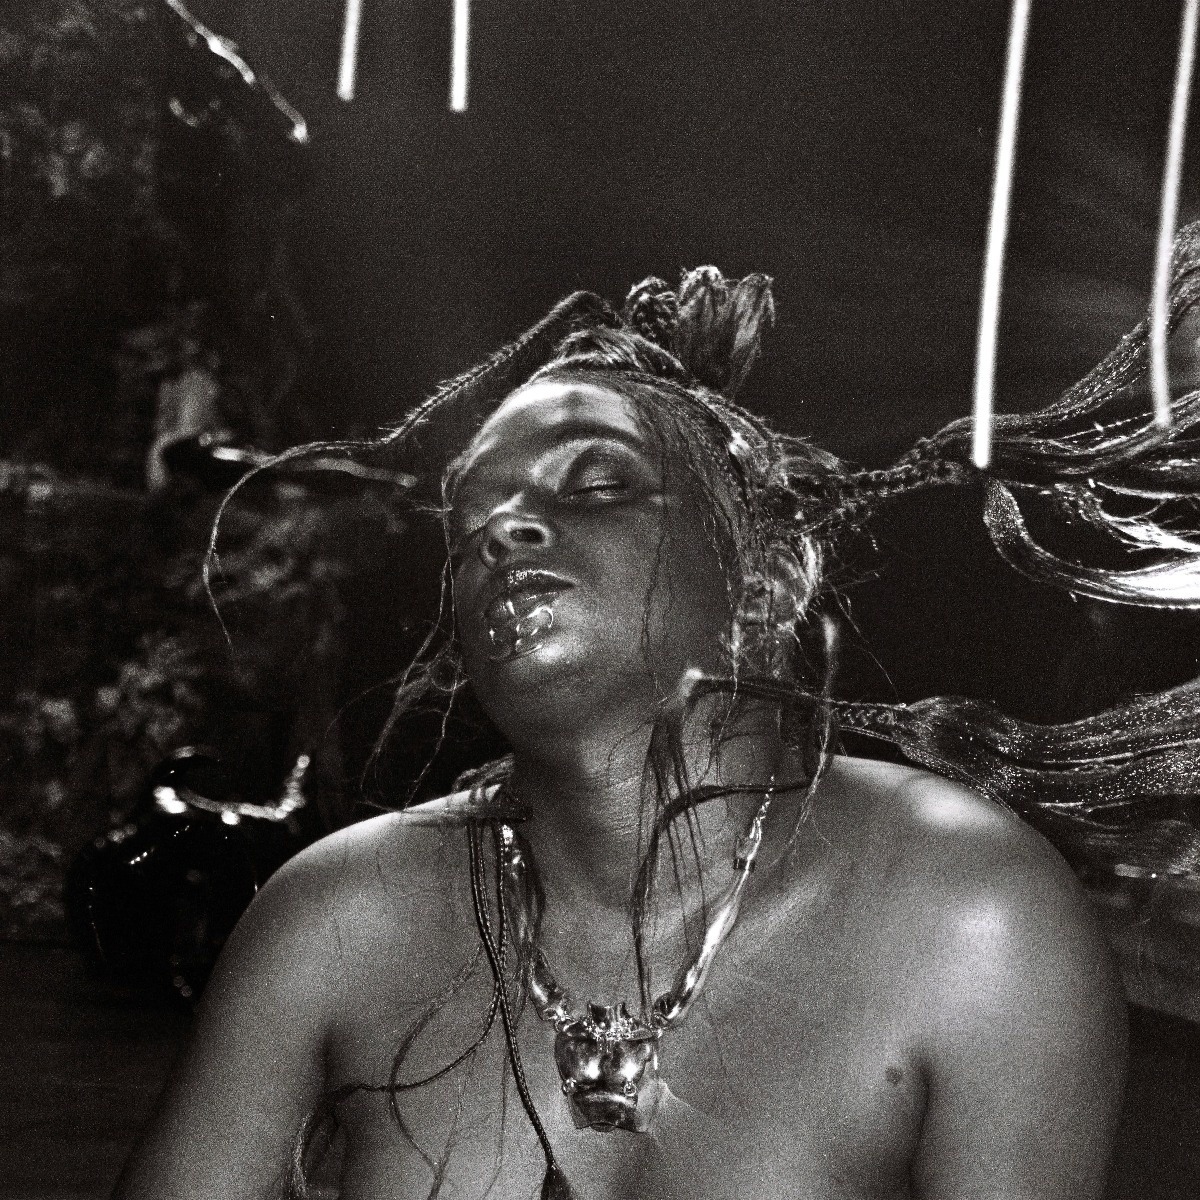 Lotic announces new EP, ‘Sparkling Water’, shares single: Listen